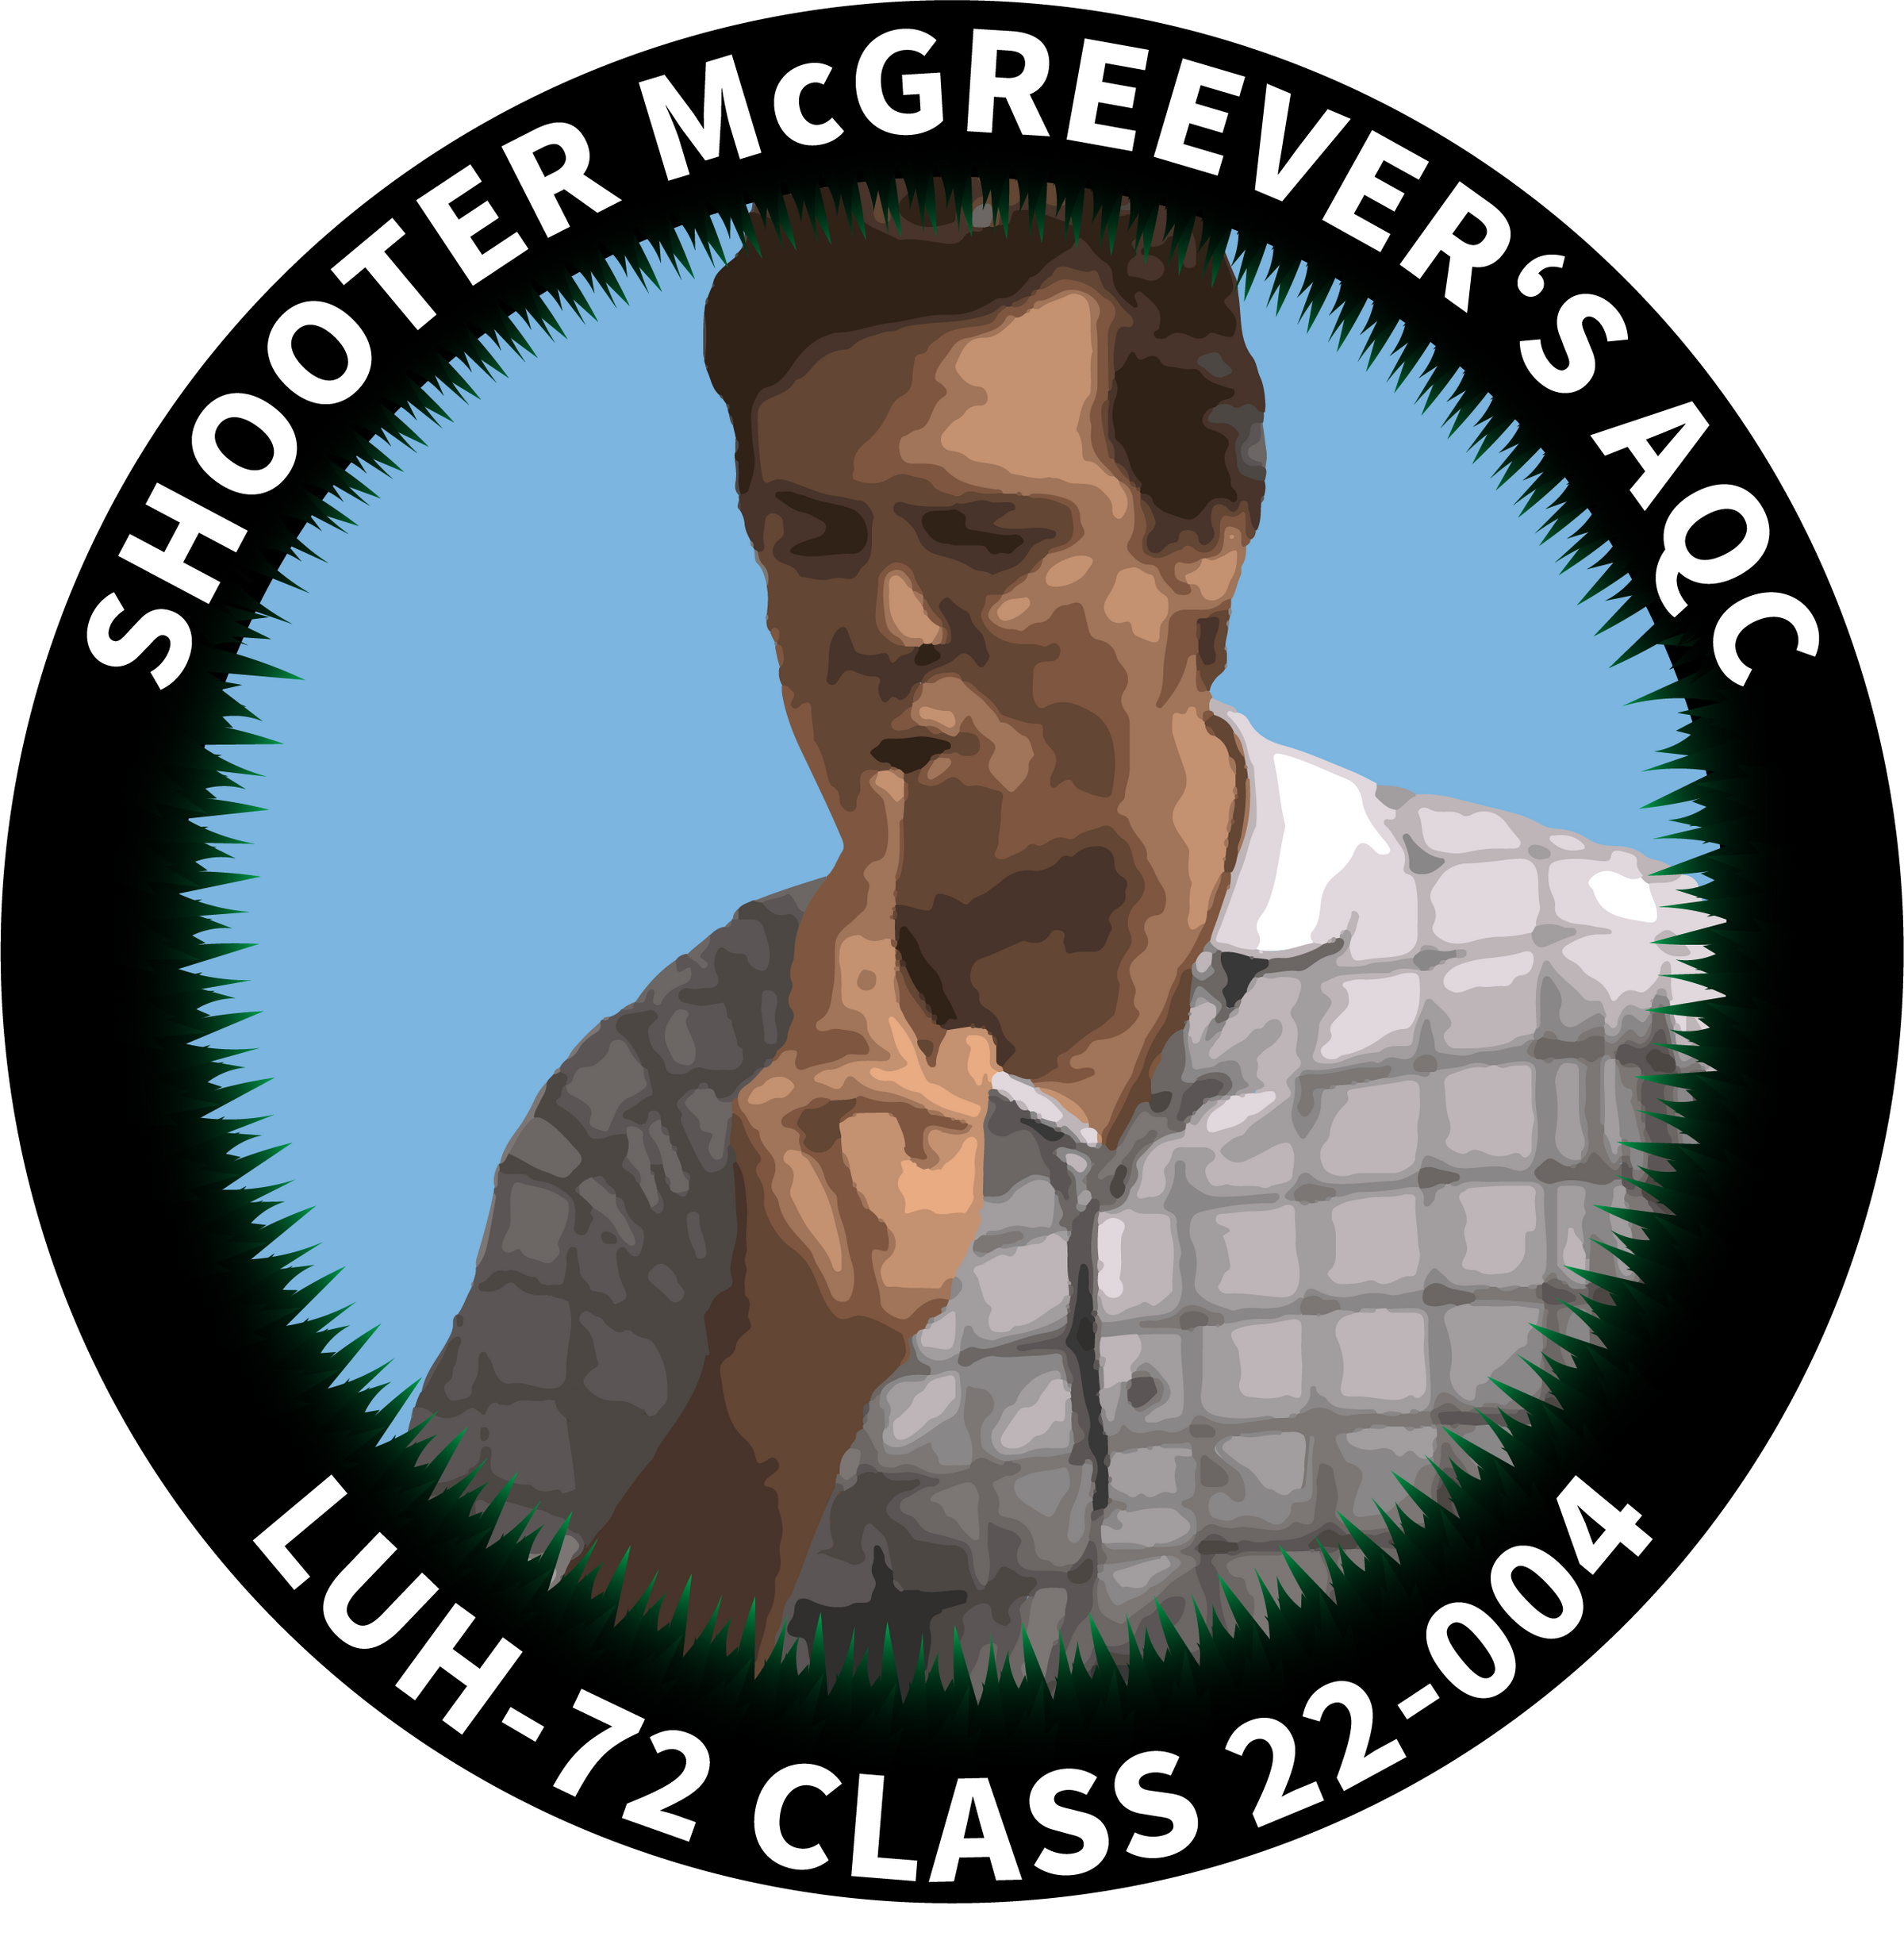 LUH-72 AQC Class 22-004 "Shooter McGreever's"